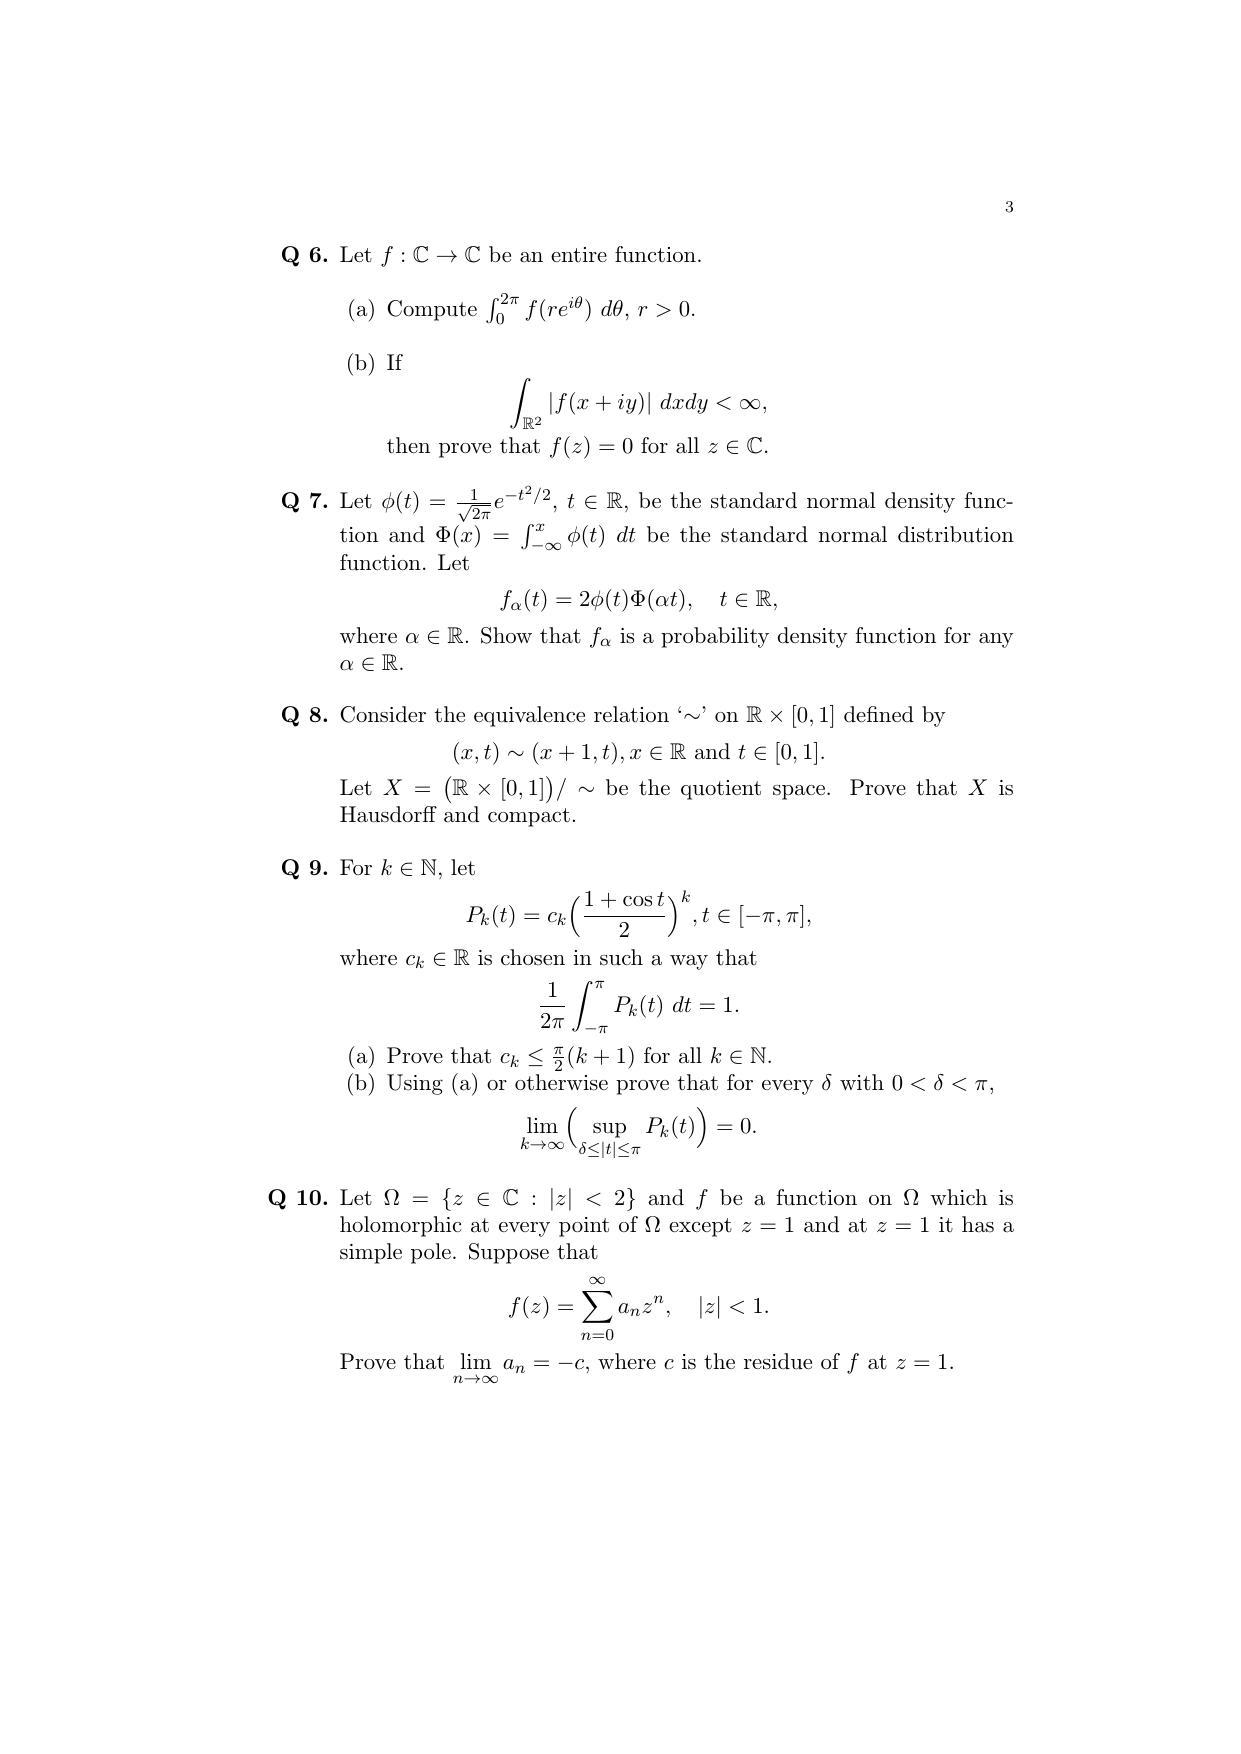 ISI Admission Test JRF in Mathematics MTA 2015 Sample Paper - Page 2